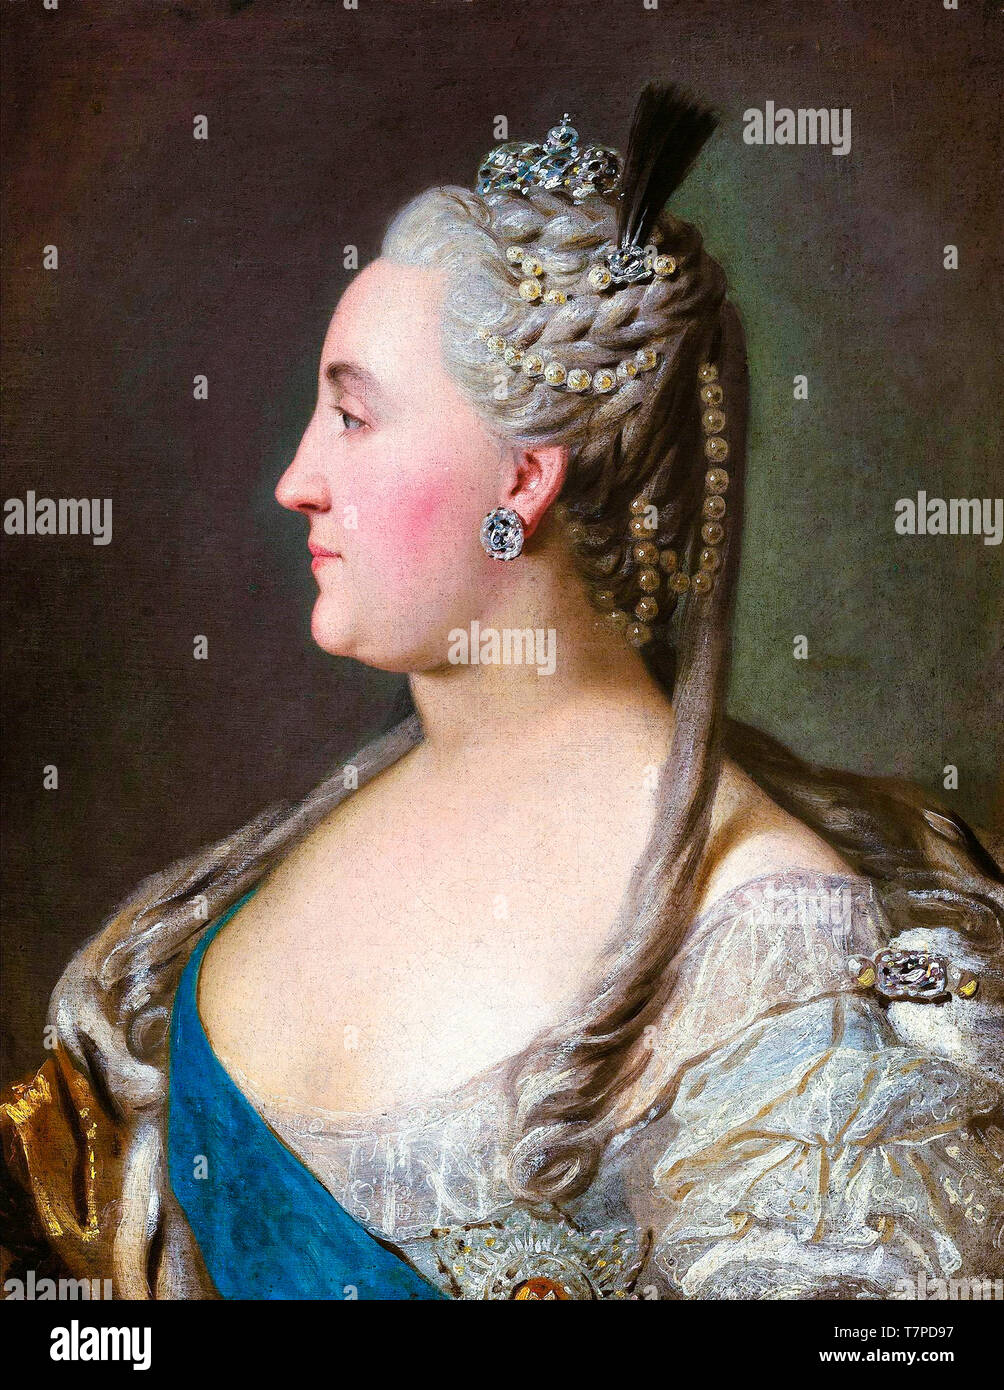 Catherine the Great, portrait painting in profile by Fyodor Rokotov, 1763 Stock Photo